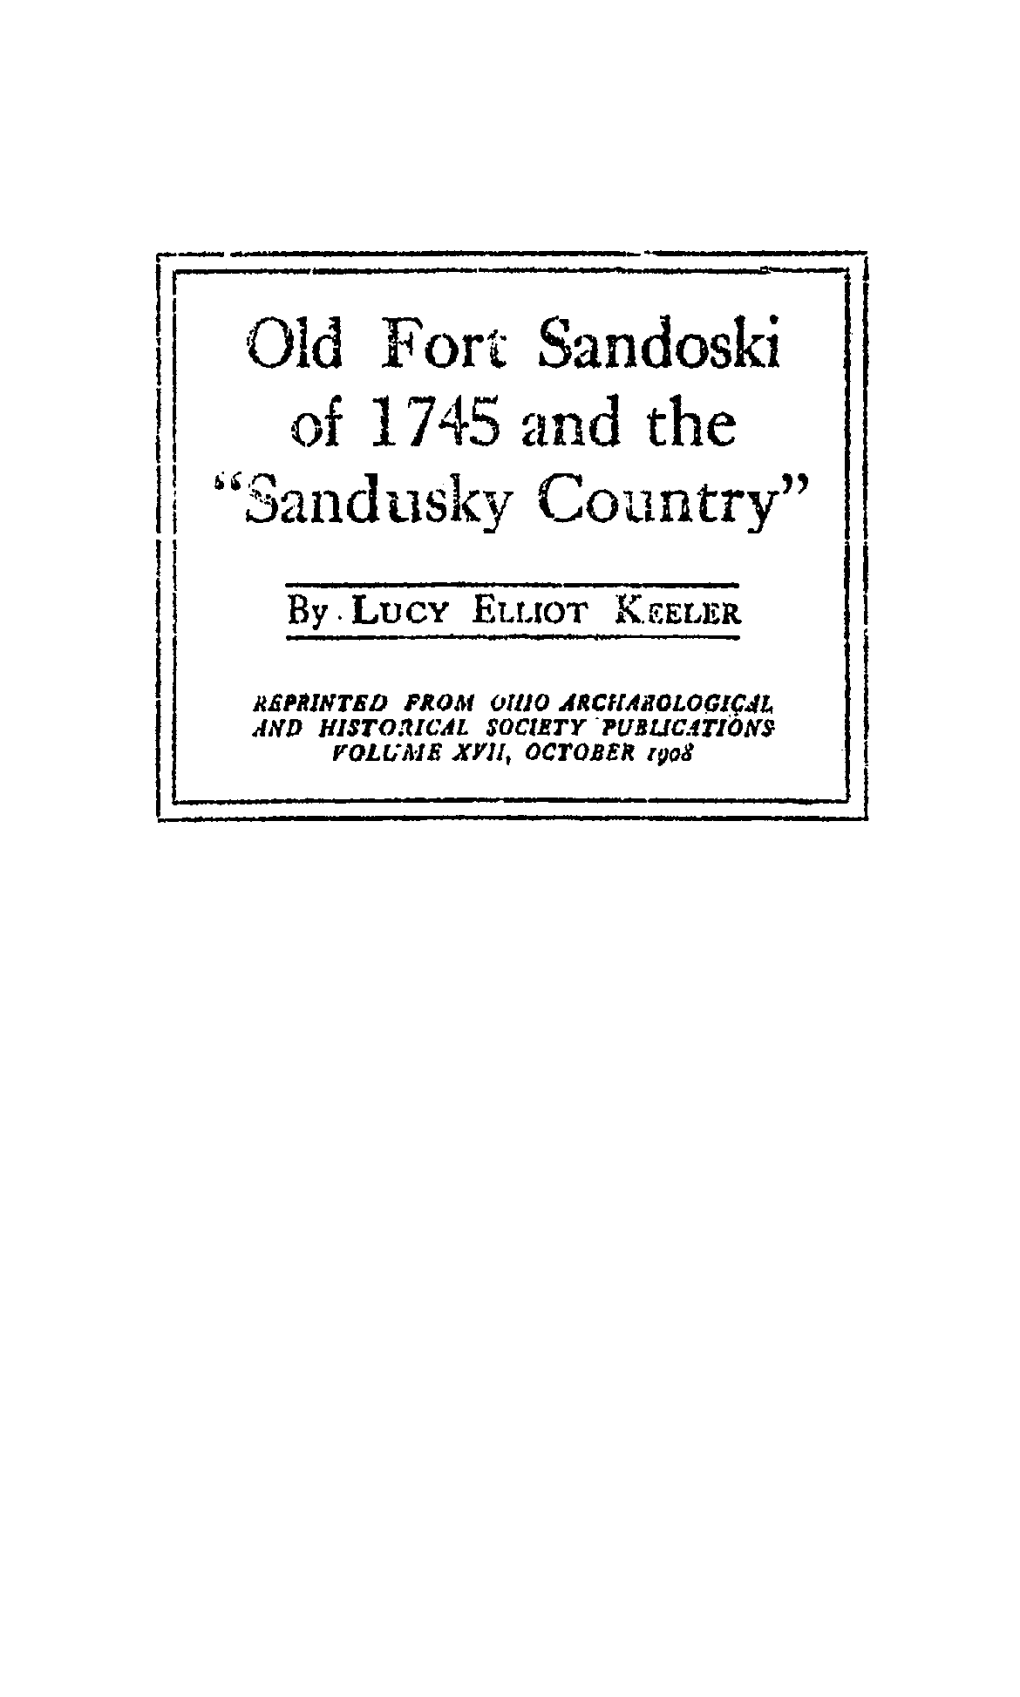 Old Fort Sandoski of 1745 and the Sandusky Country"